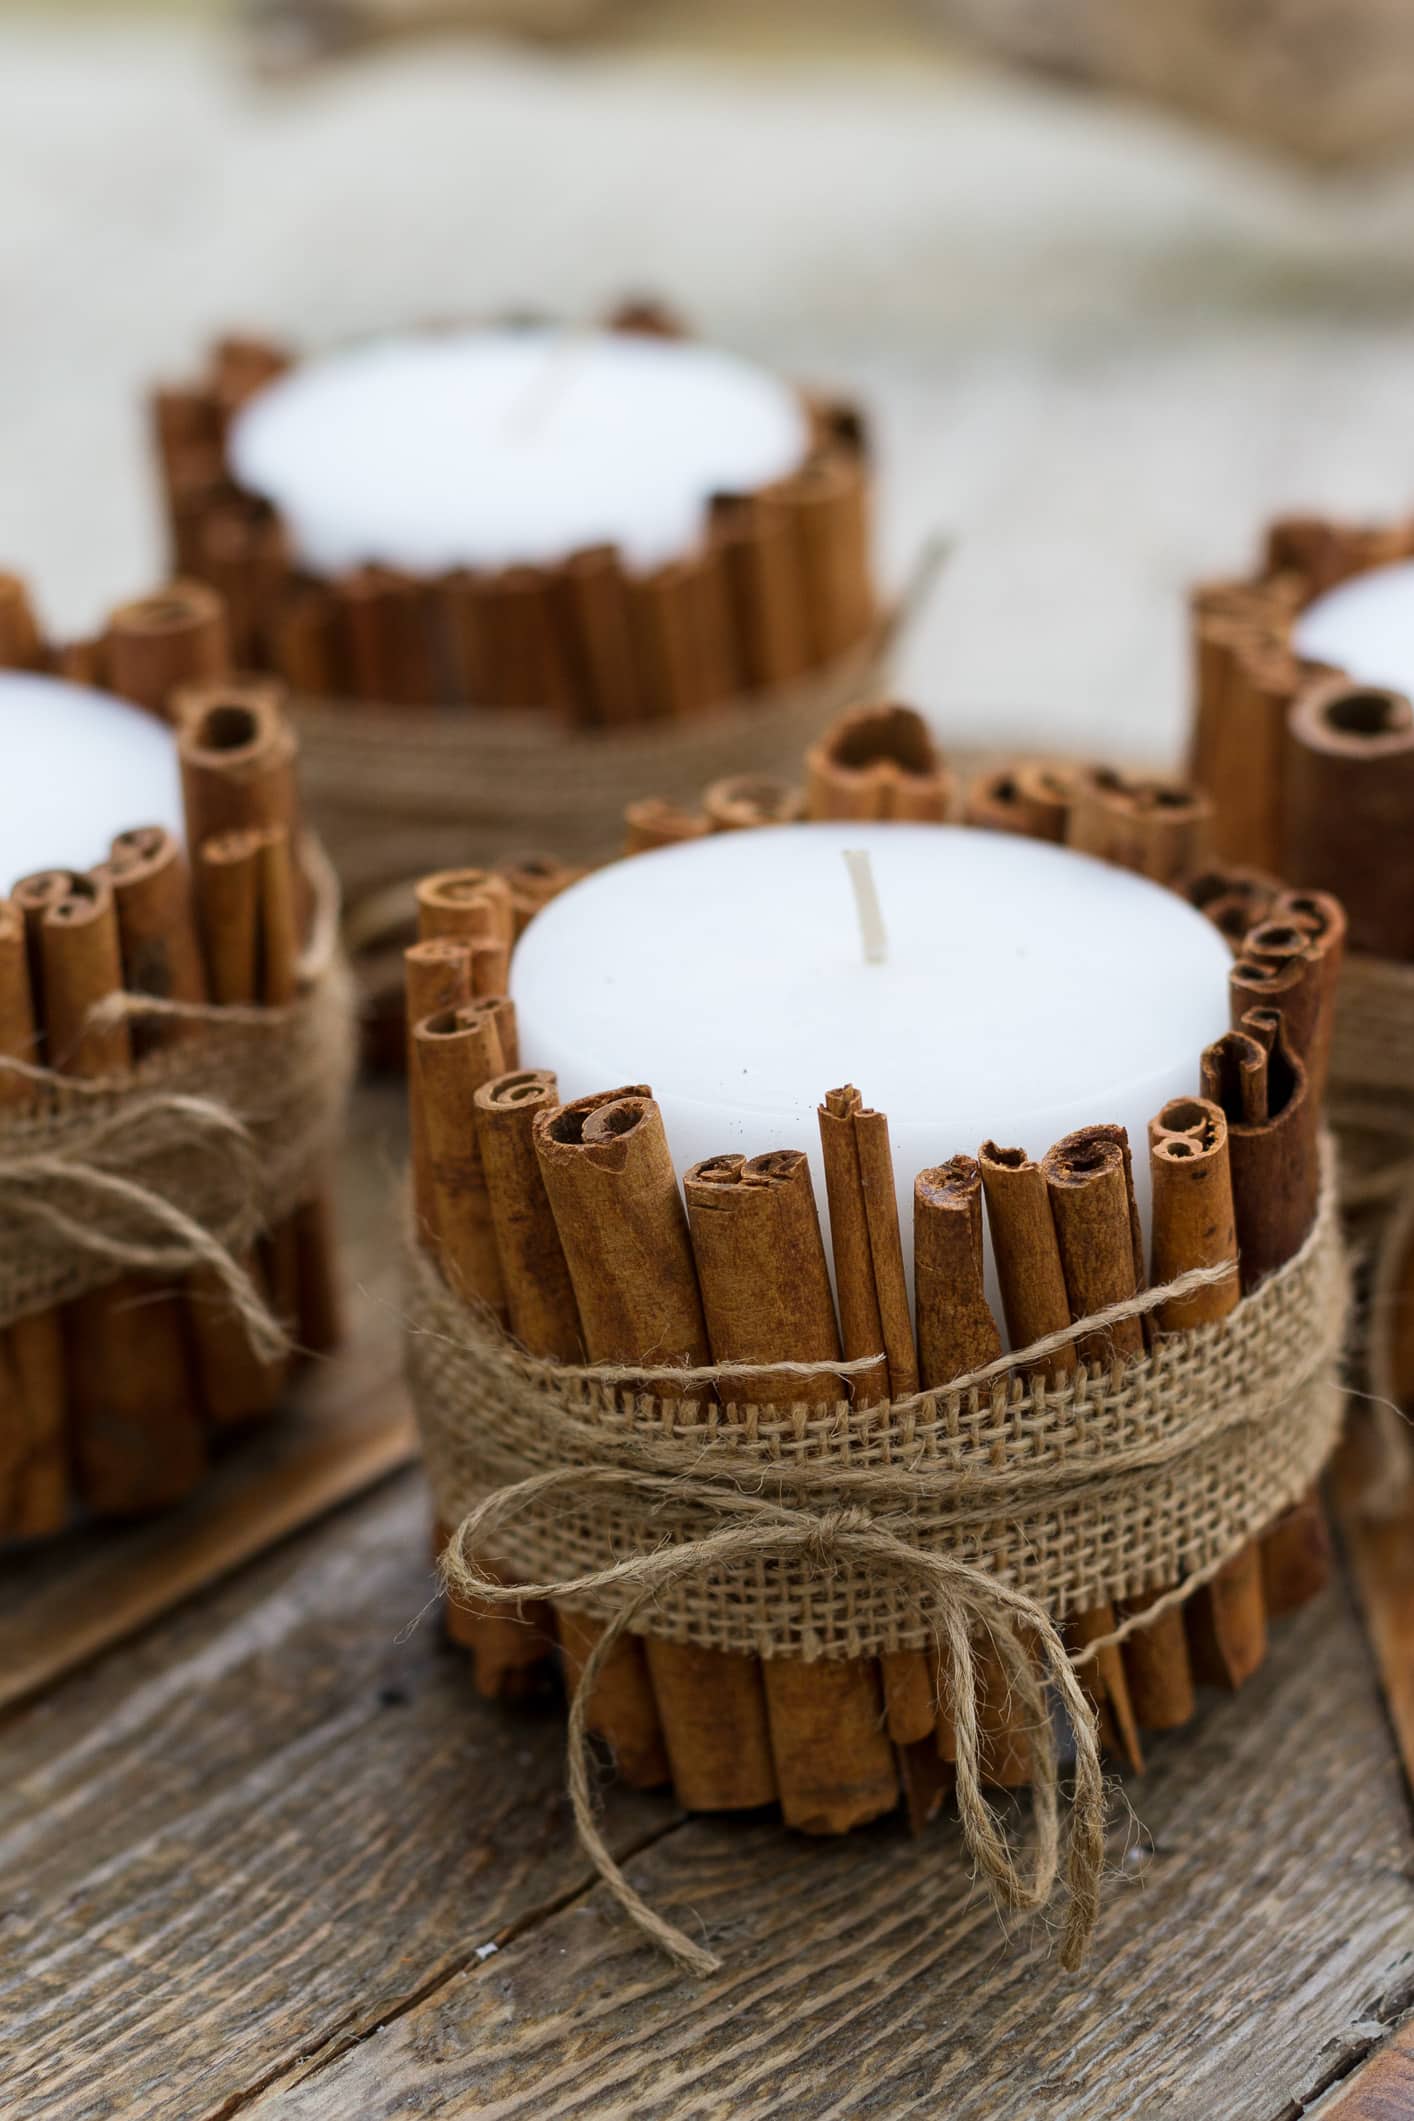 Cinnamon Stick Candles | 50 Awesome DIY Yule Decorations and Craft Ideas You Can Make for the Winter Solstice